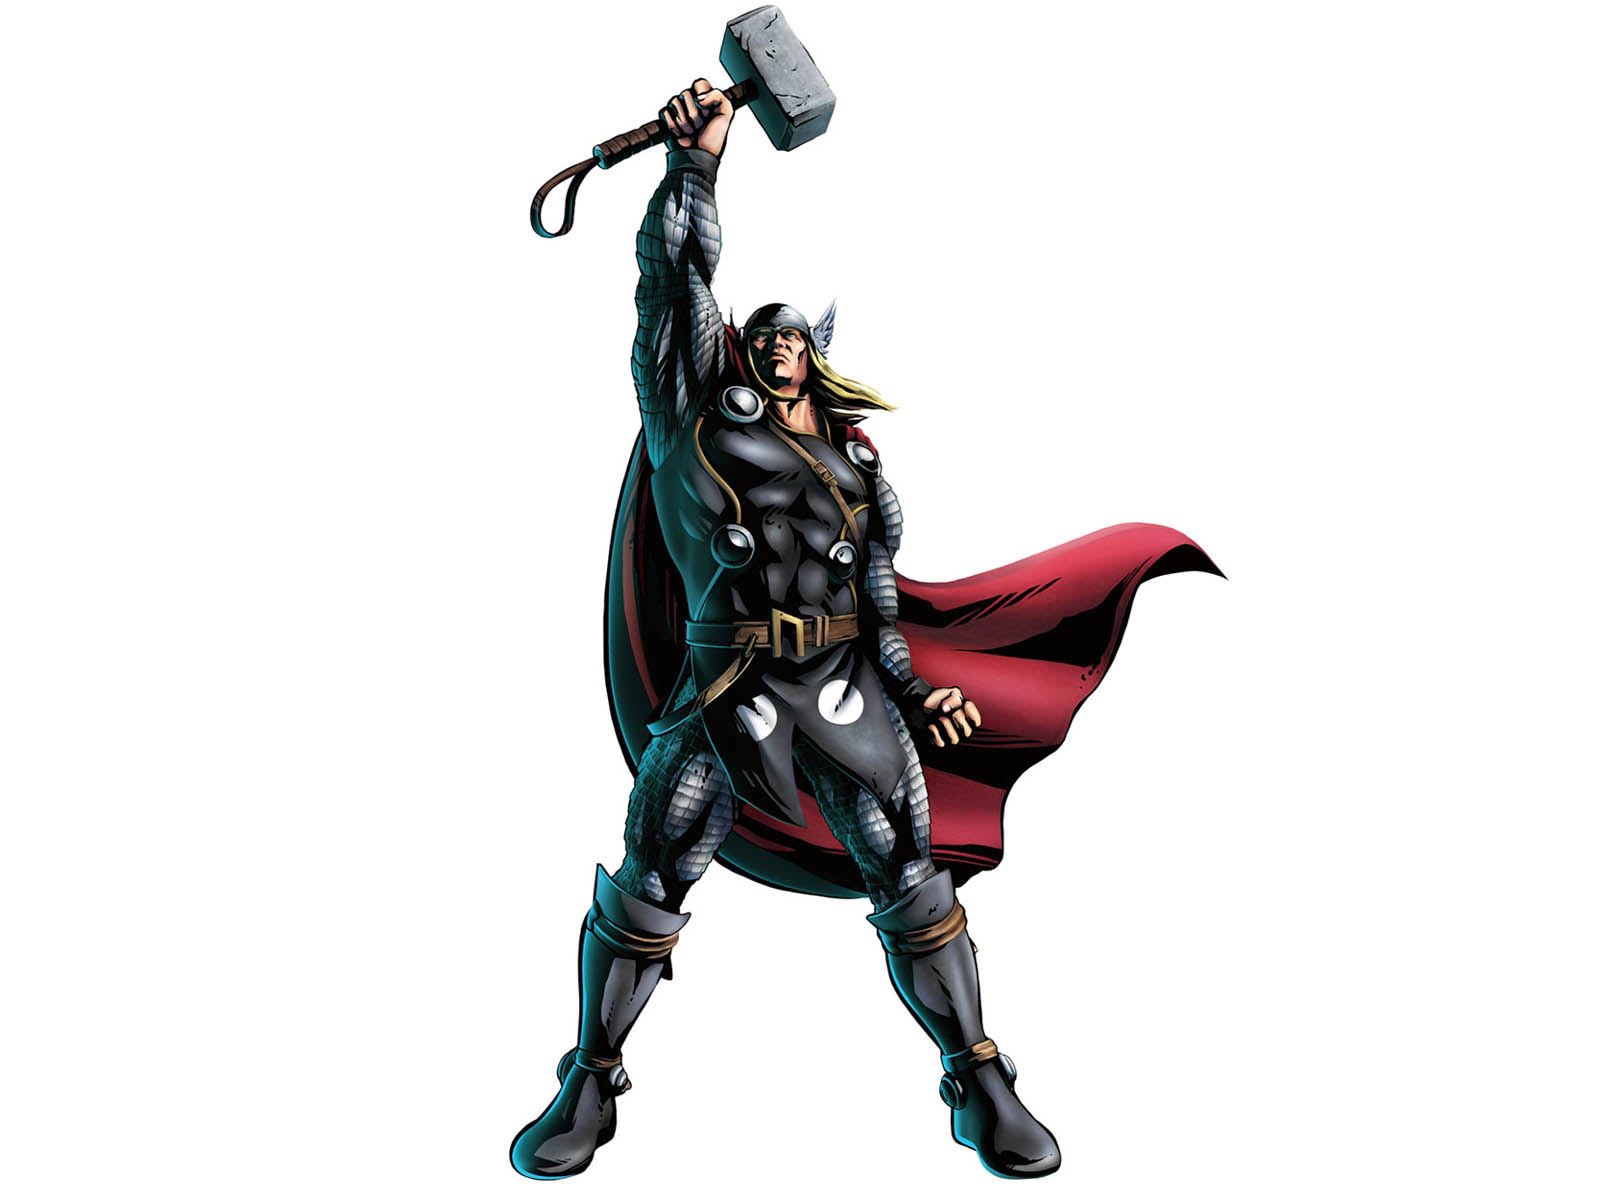 Free download Thor HD background Marvel wallpapers [1600x1200] for your